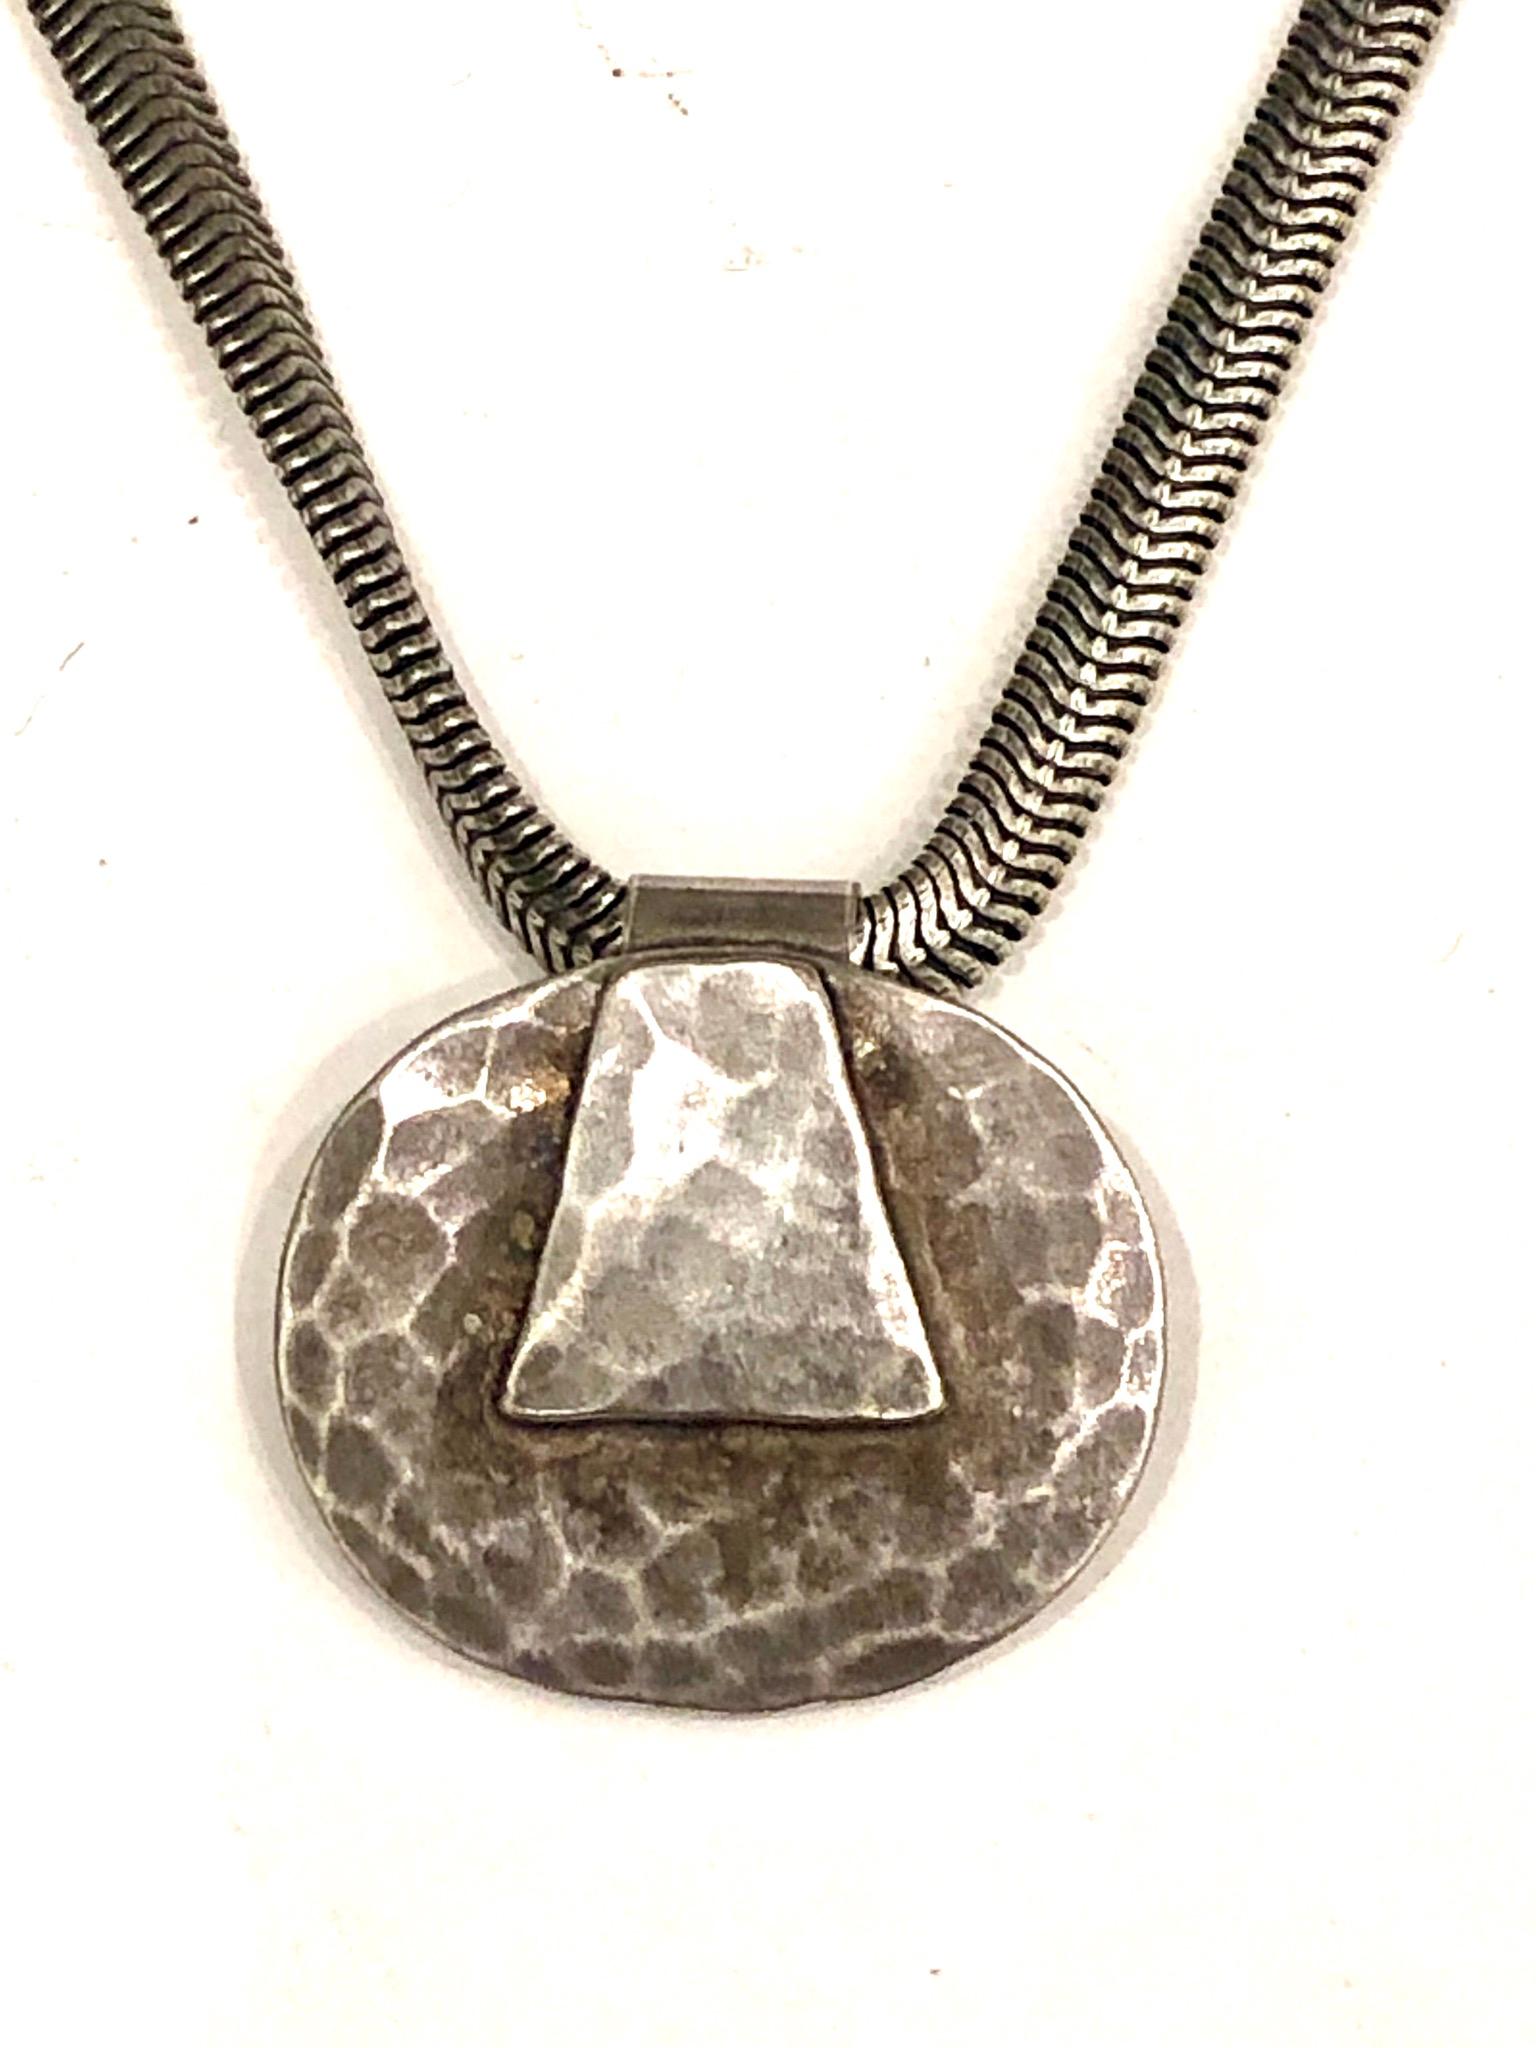 Great design on this nice pendant with original necklace in silver hammered patinated finish circa 1980s, stamped in the back BAER SF, from San Francisco great California design. The necklace its 19.5